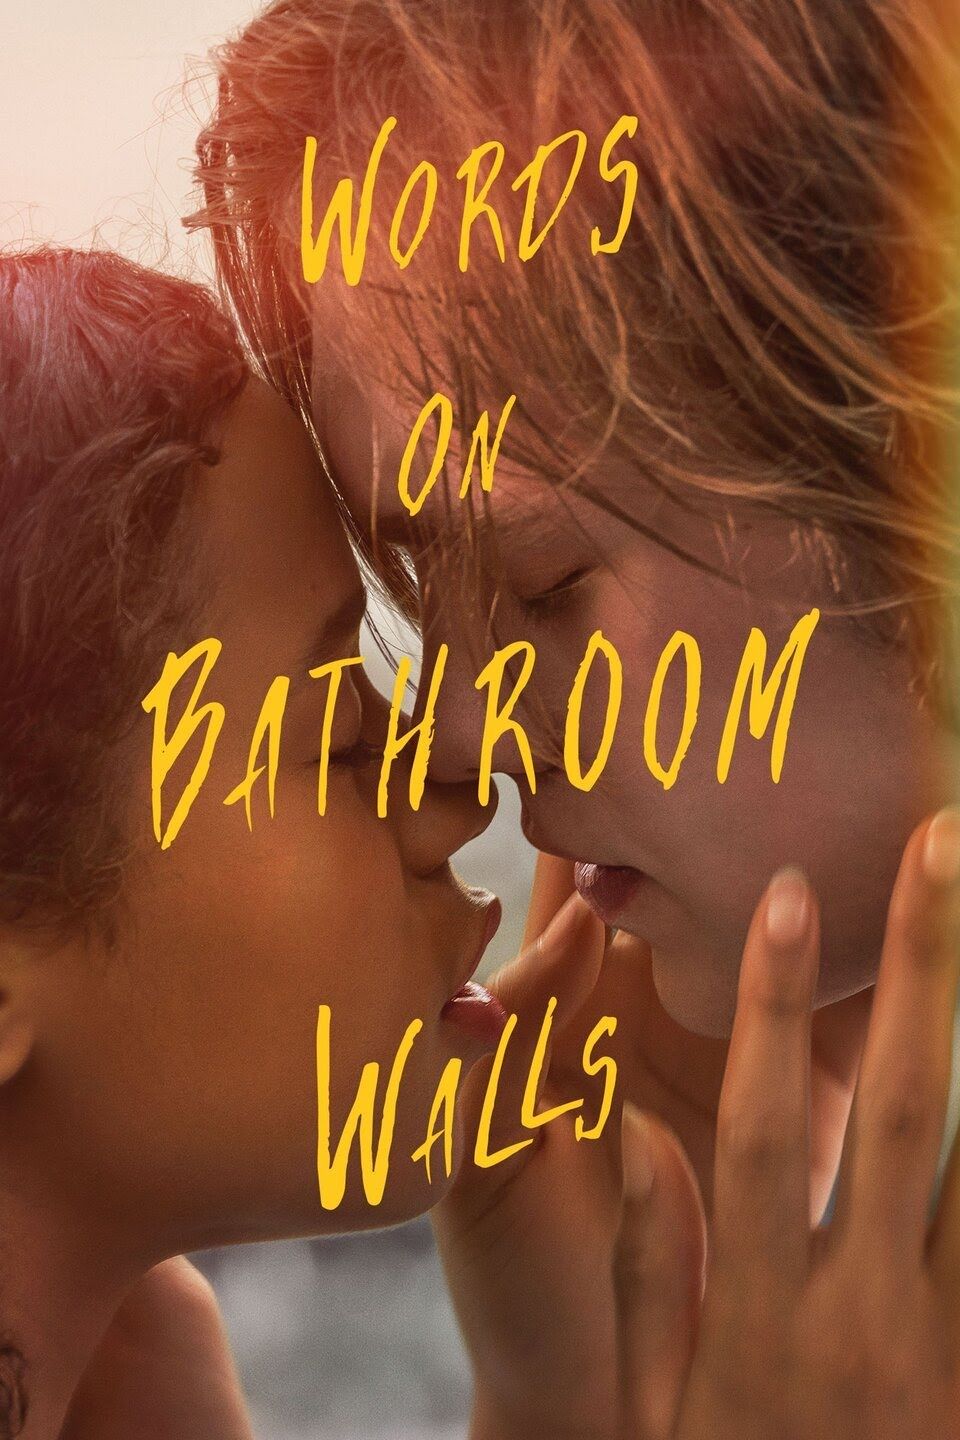 words on bathroom walls book review